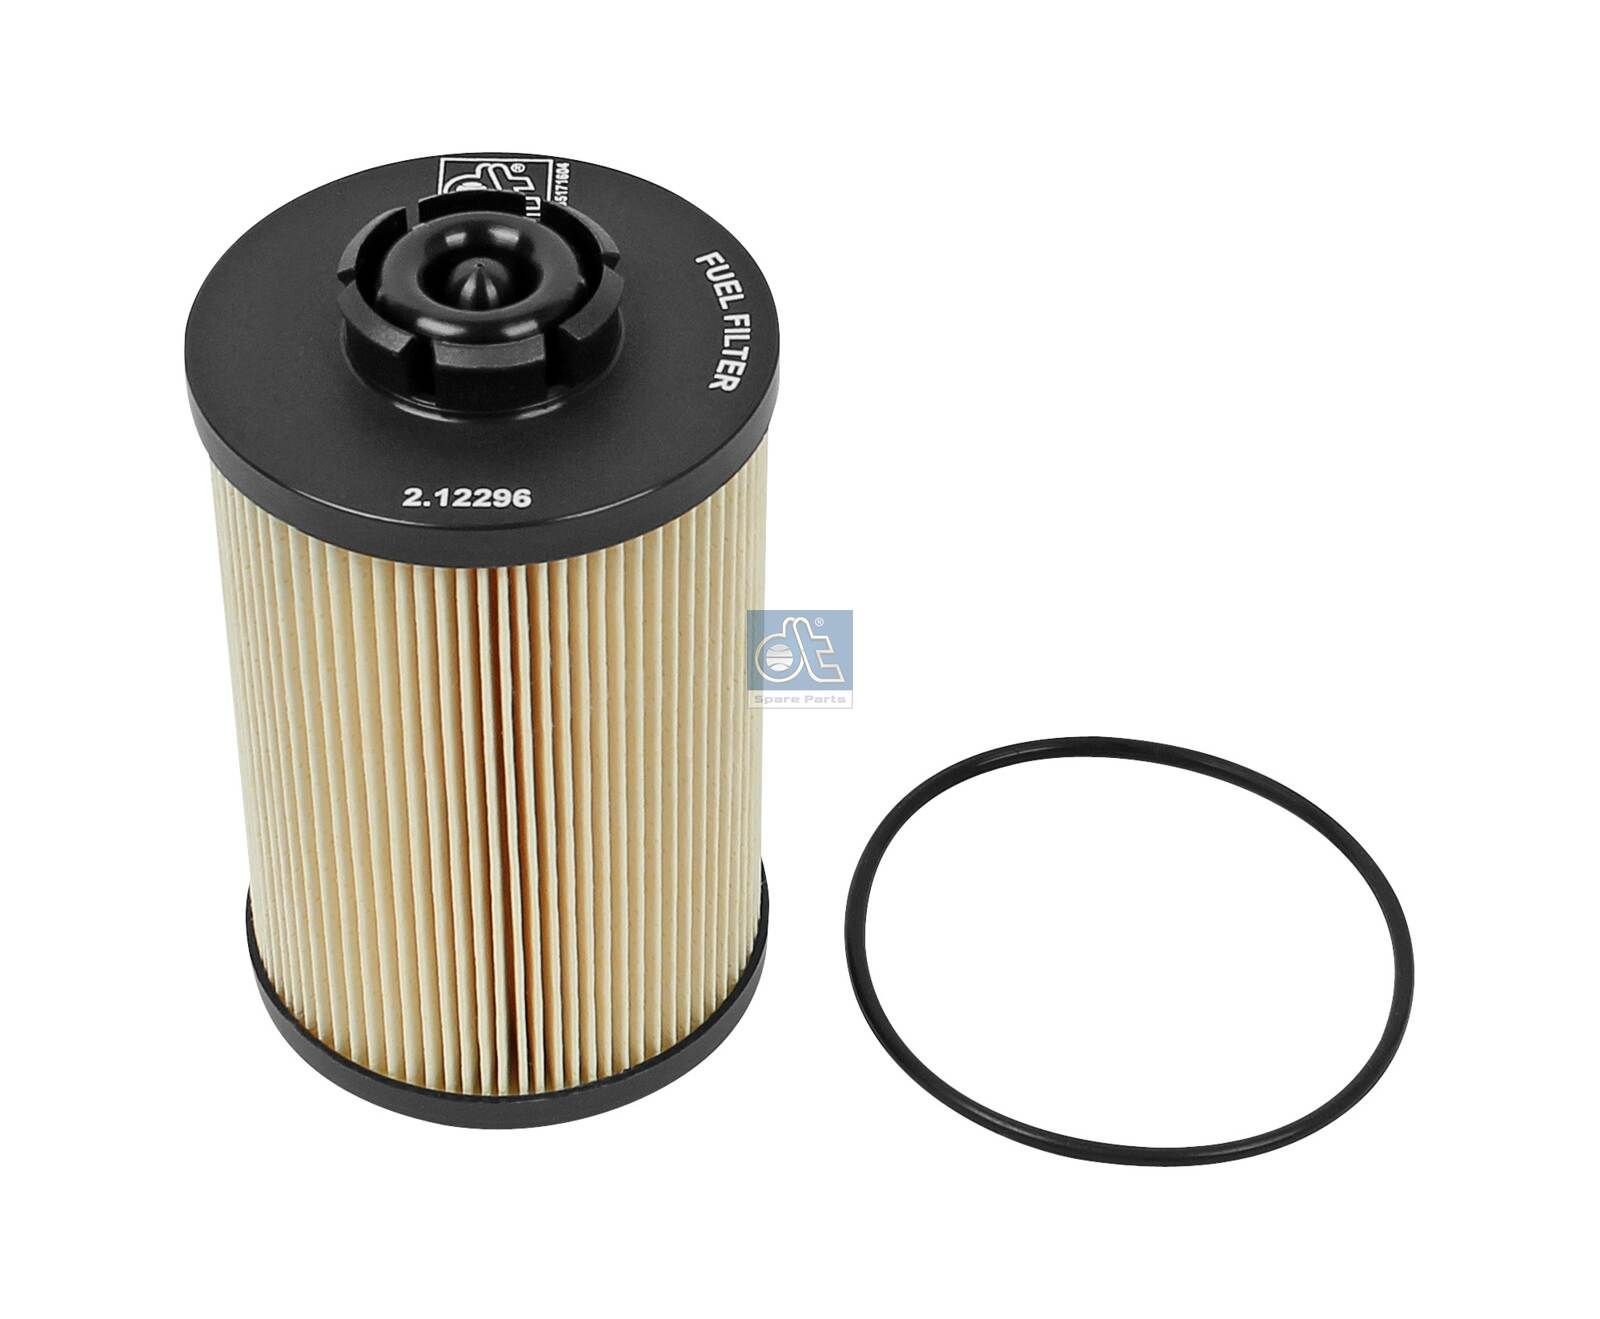 PU 1058X DT Spare Parts 2.12296 Fuel filter 21040558